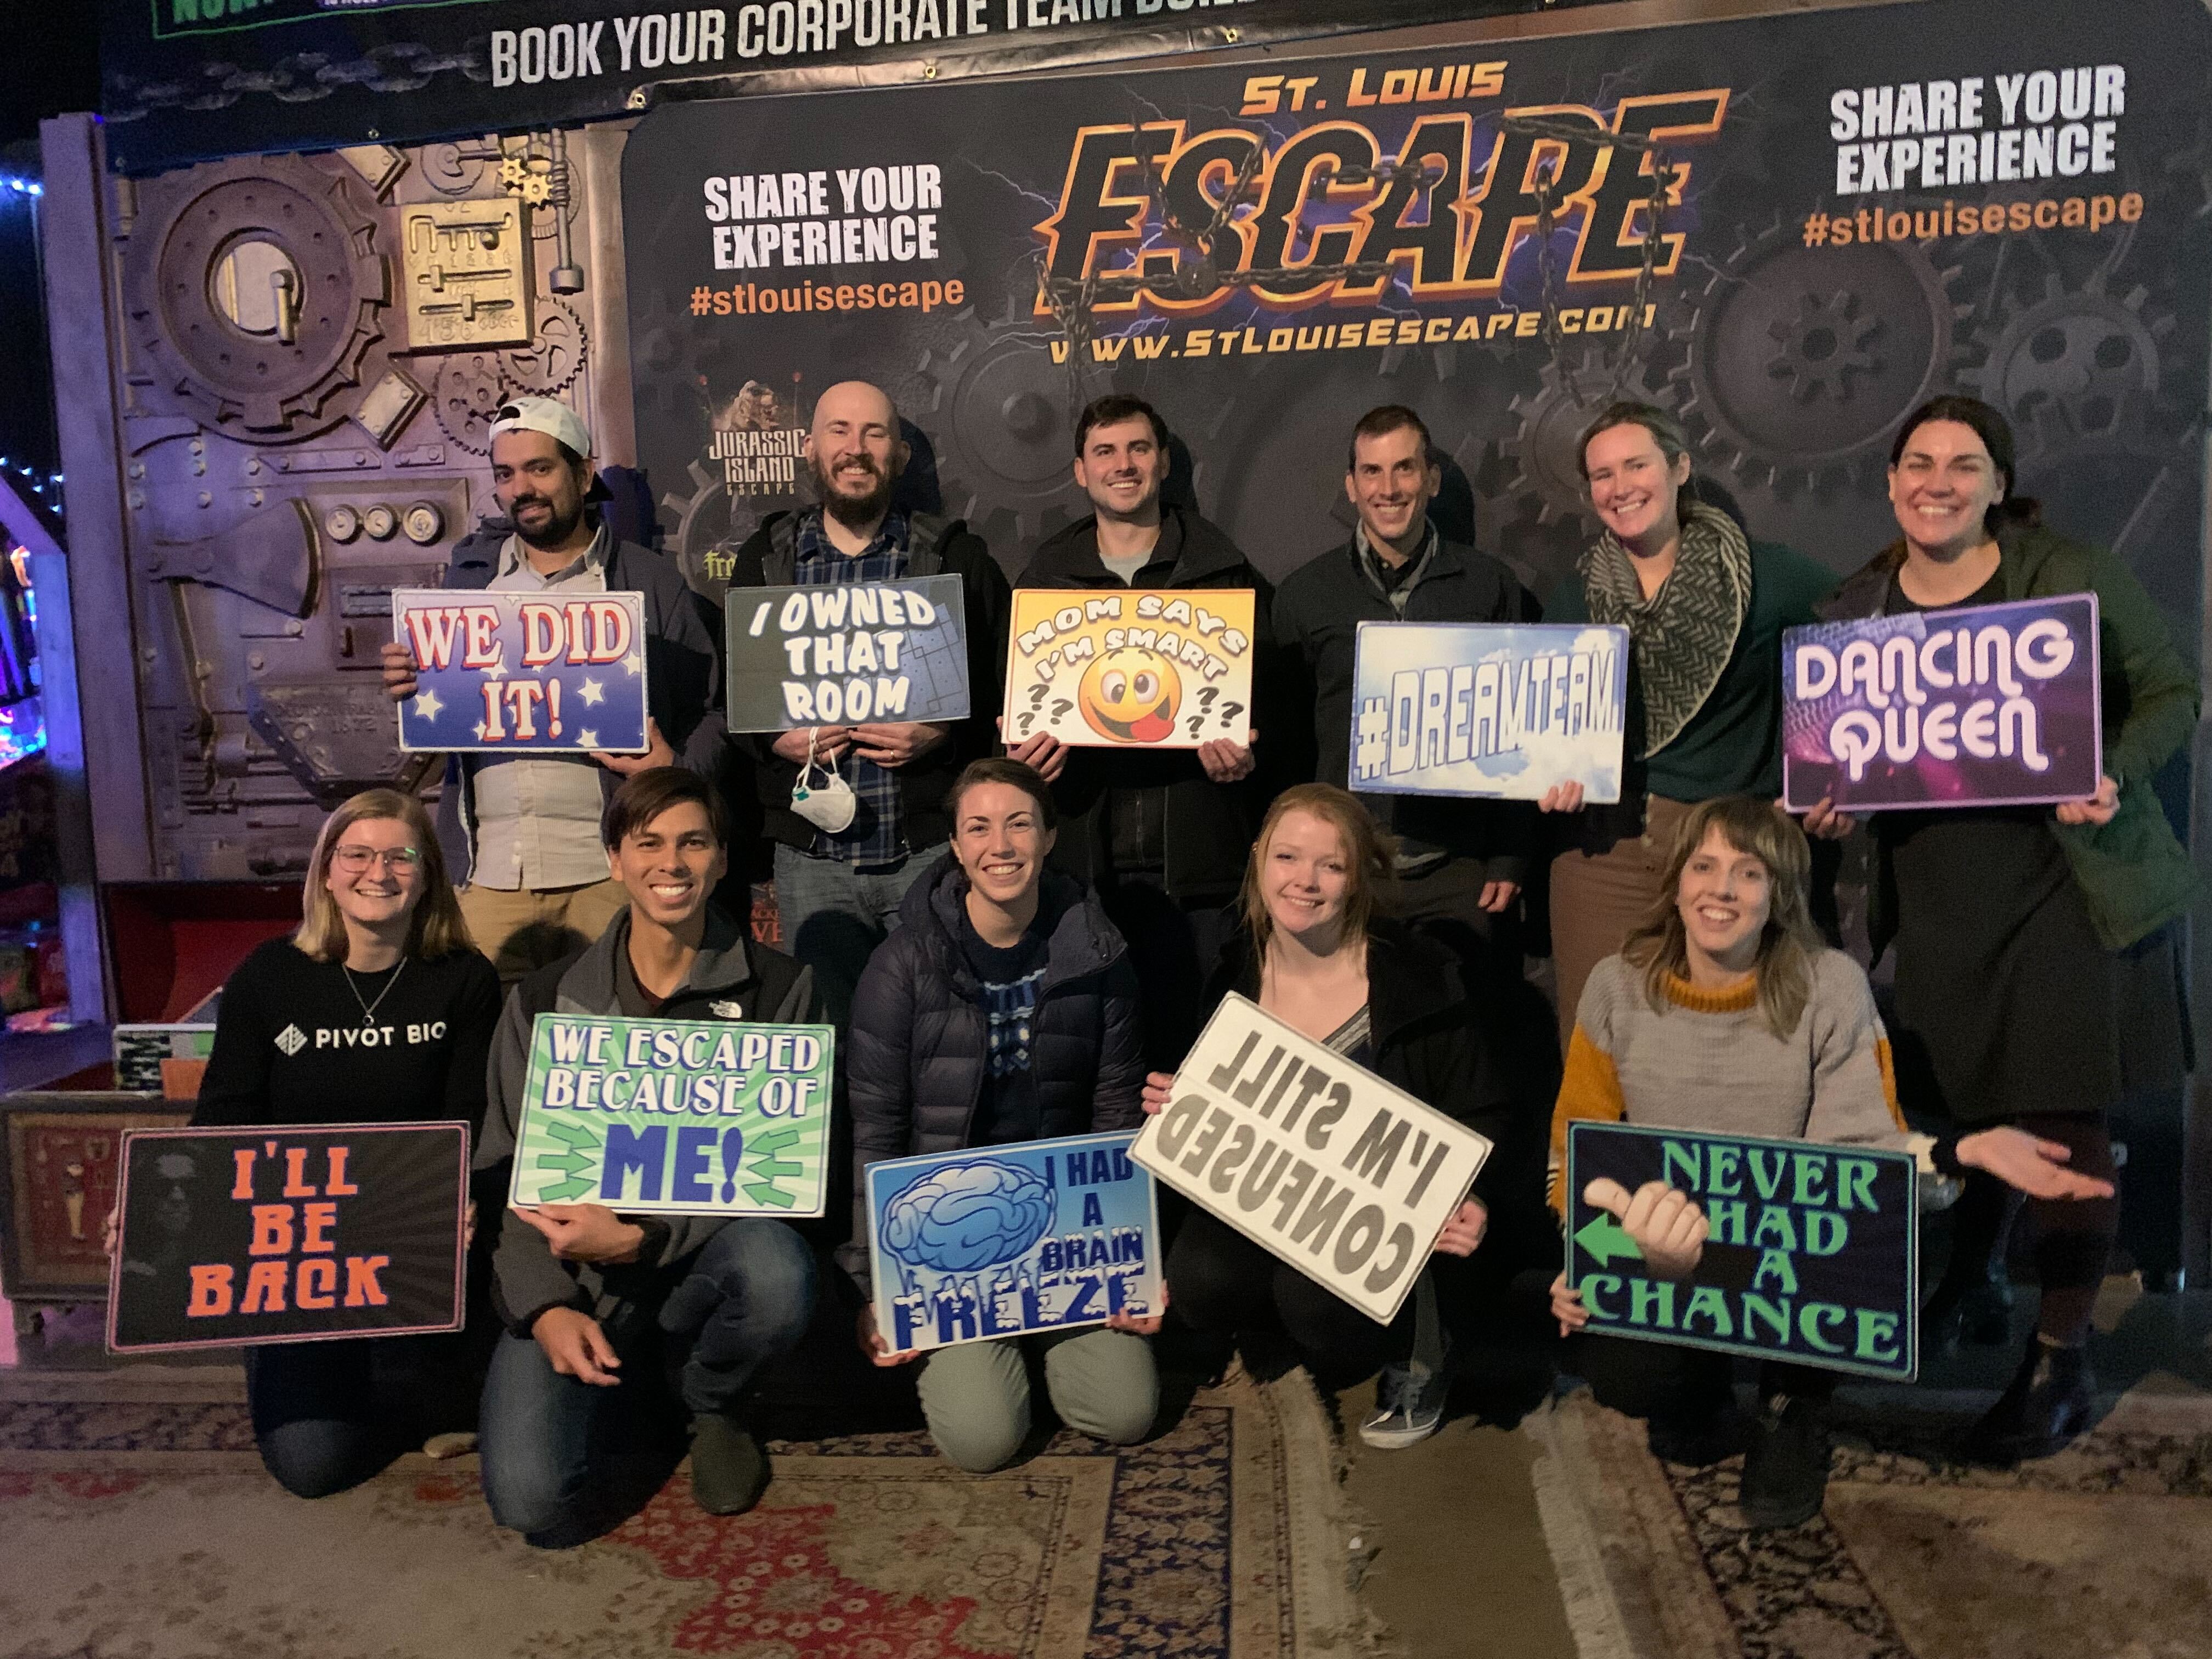 Maddi King poses for a group photo with coworkers after going through an escape room for an after work social event.